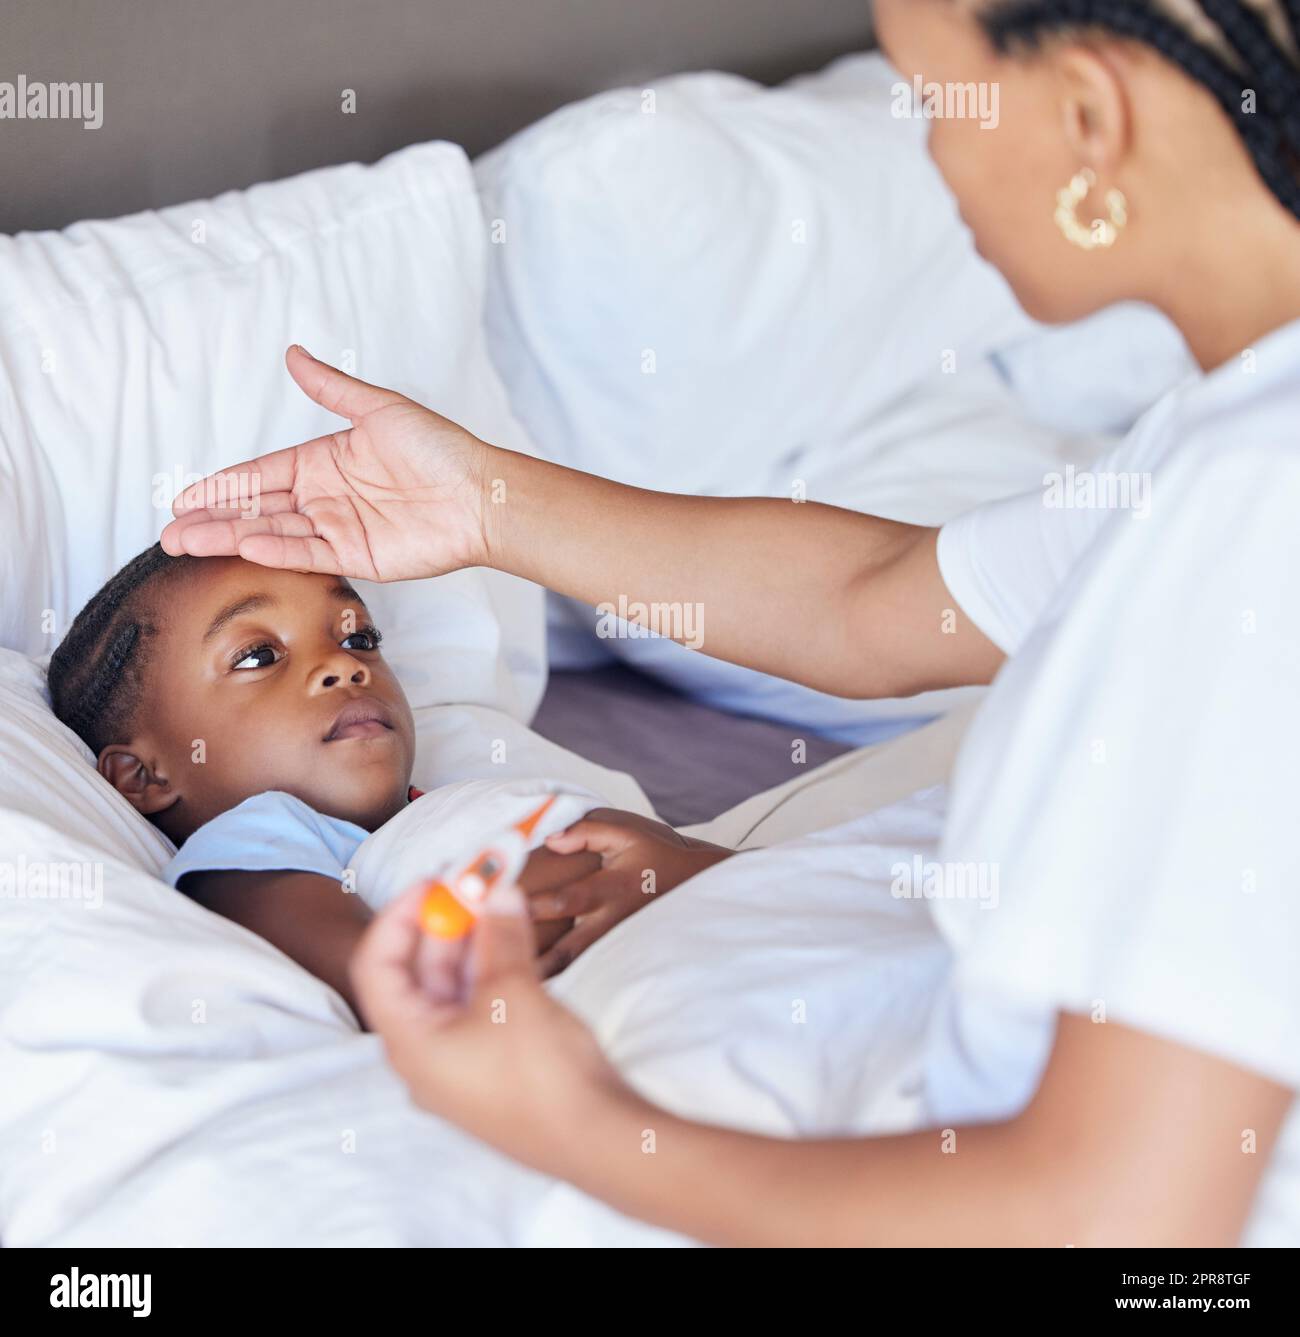 Sick little girl in bed while her mother uses a thermometer to check her temperature. Black single parent feeling daughters forehead. African American child feeling ill while her mother checks fever Stock Photo